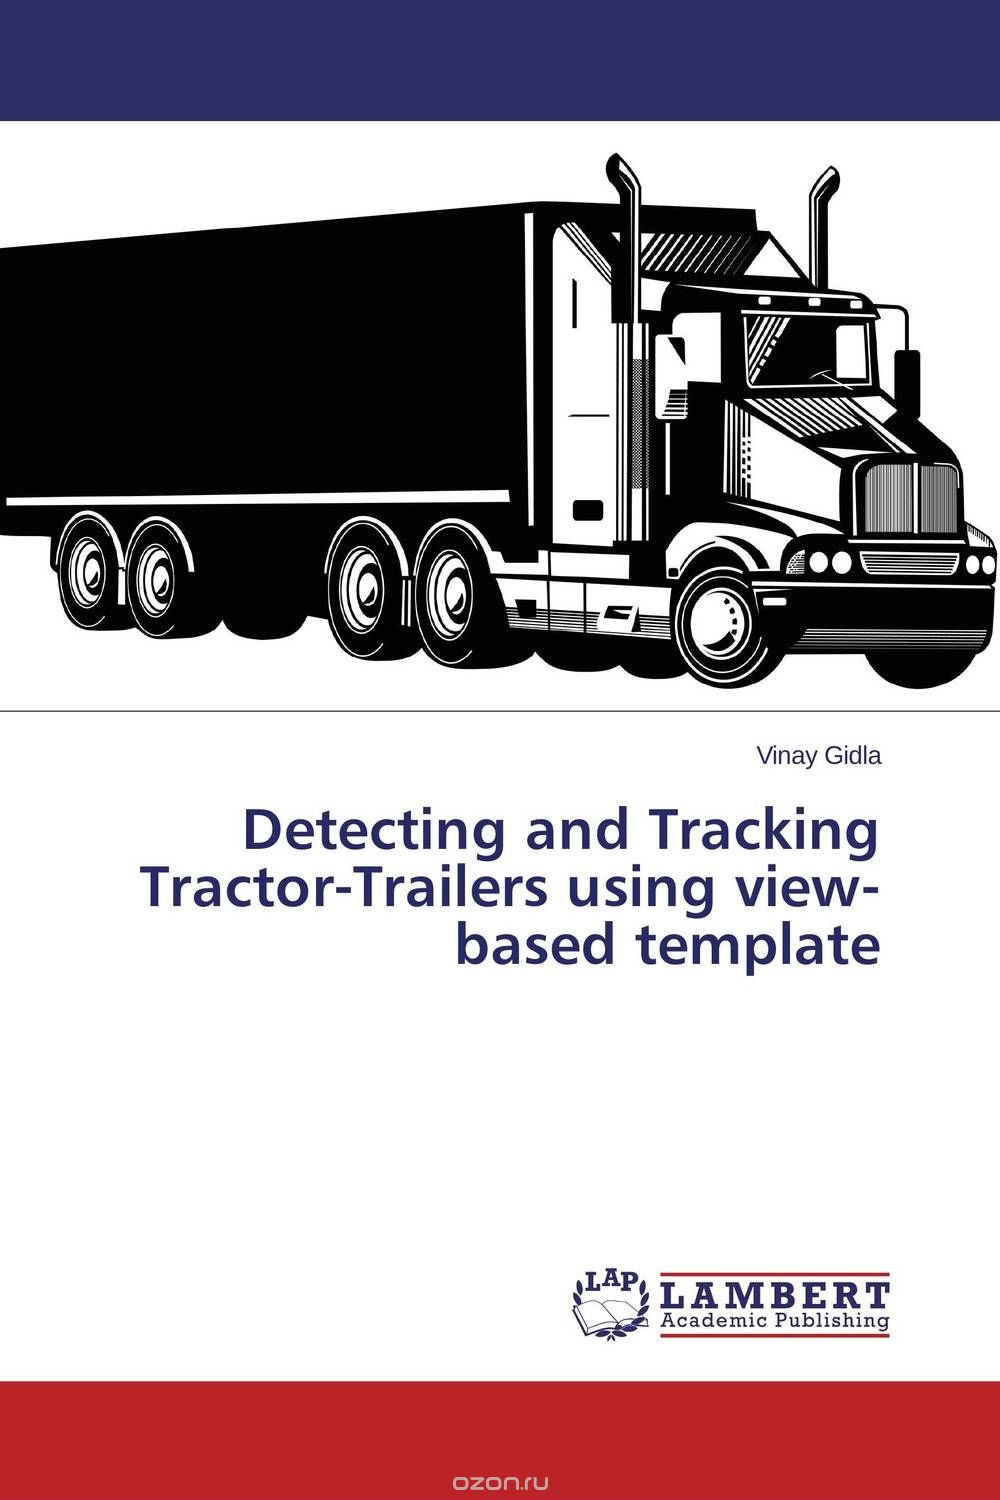 Скачать книгу "Detecting and Tracking Tractor-Trailers using view-based template"